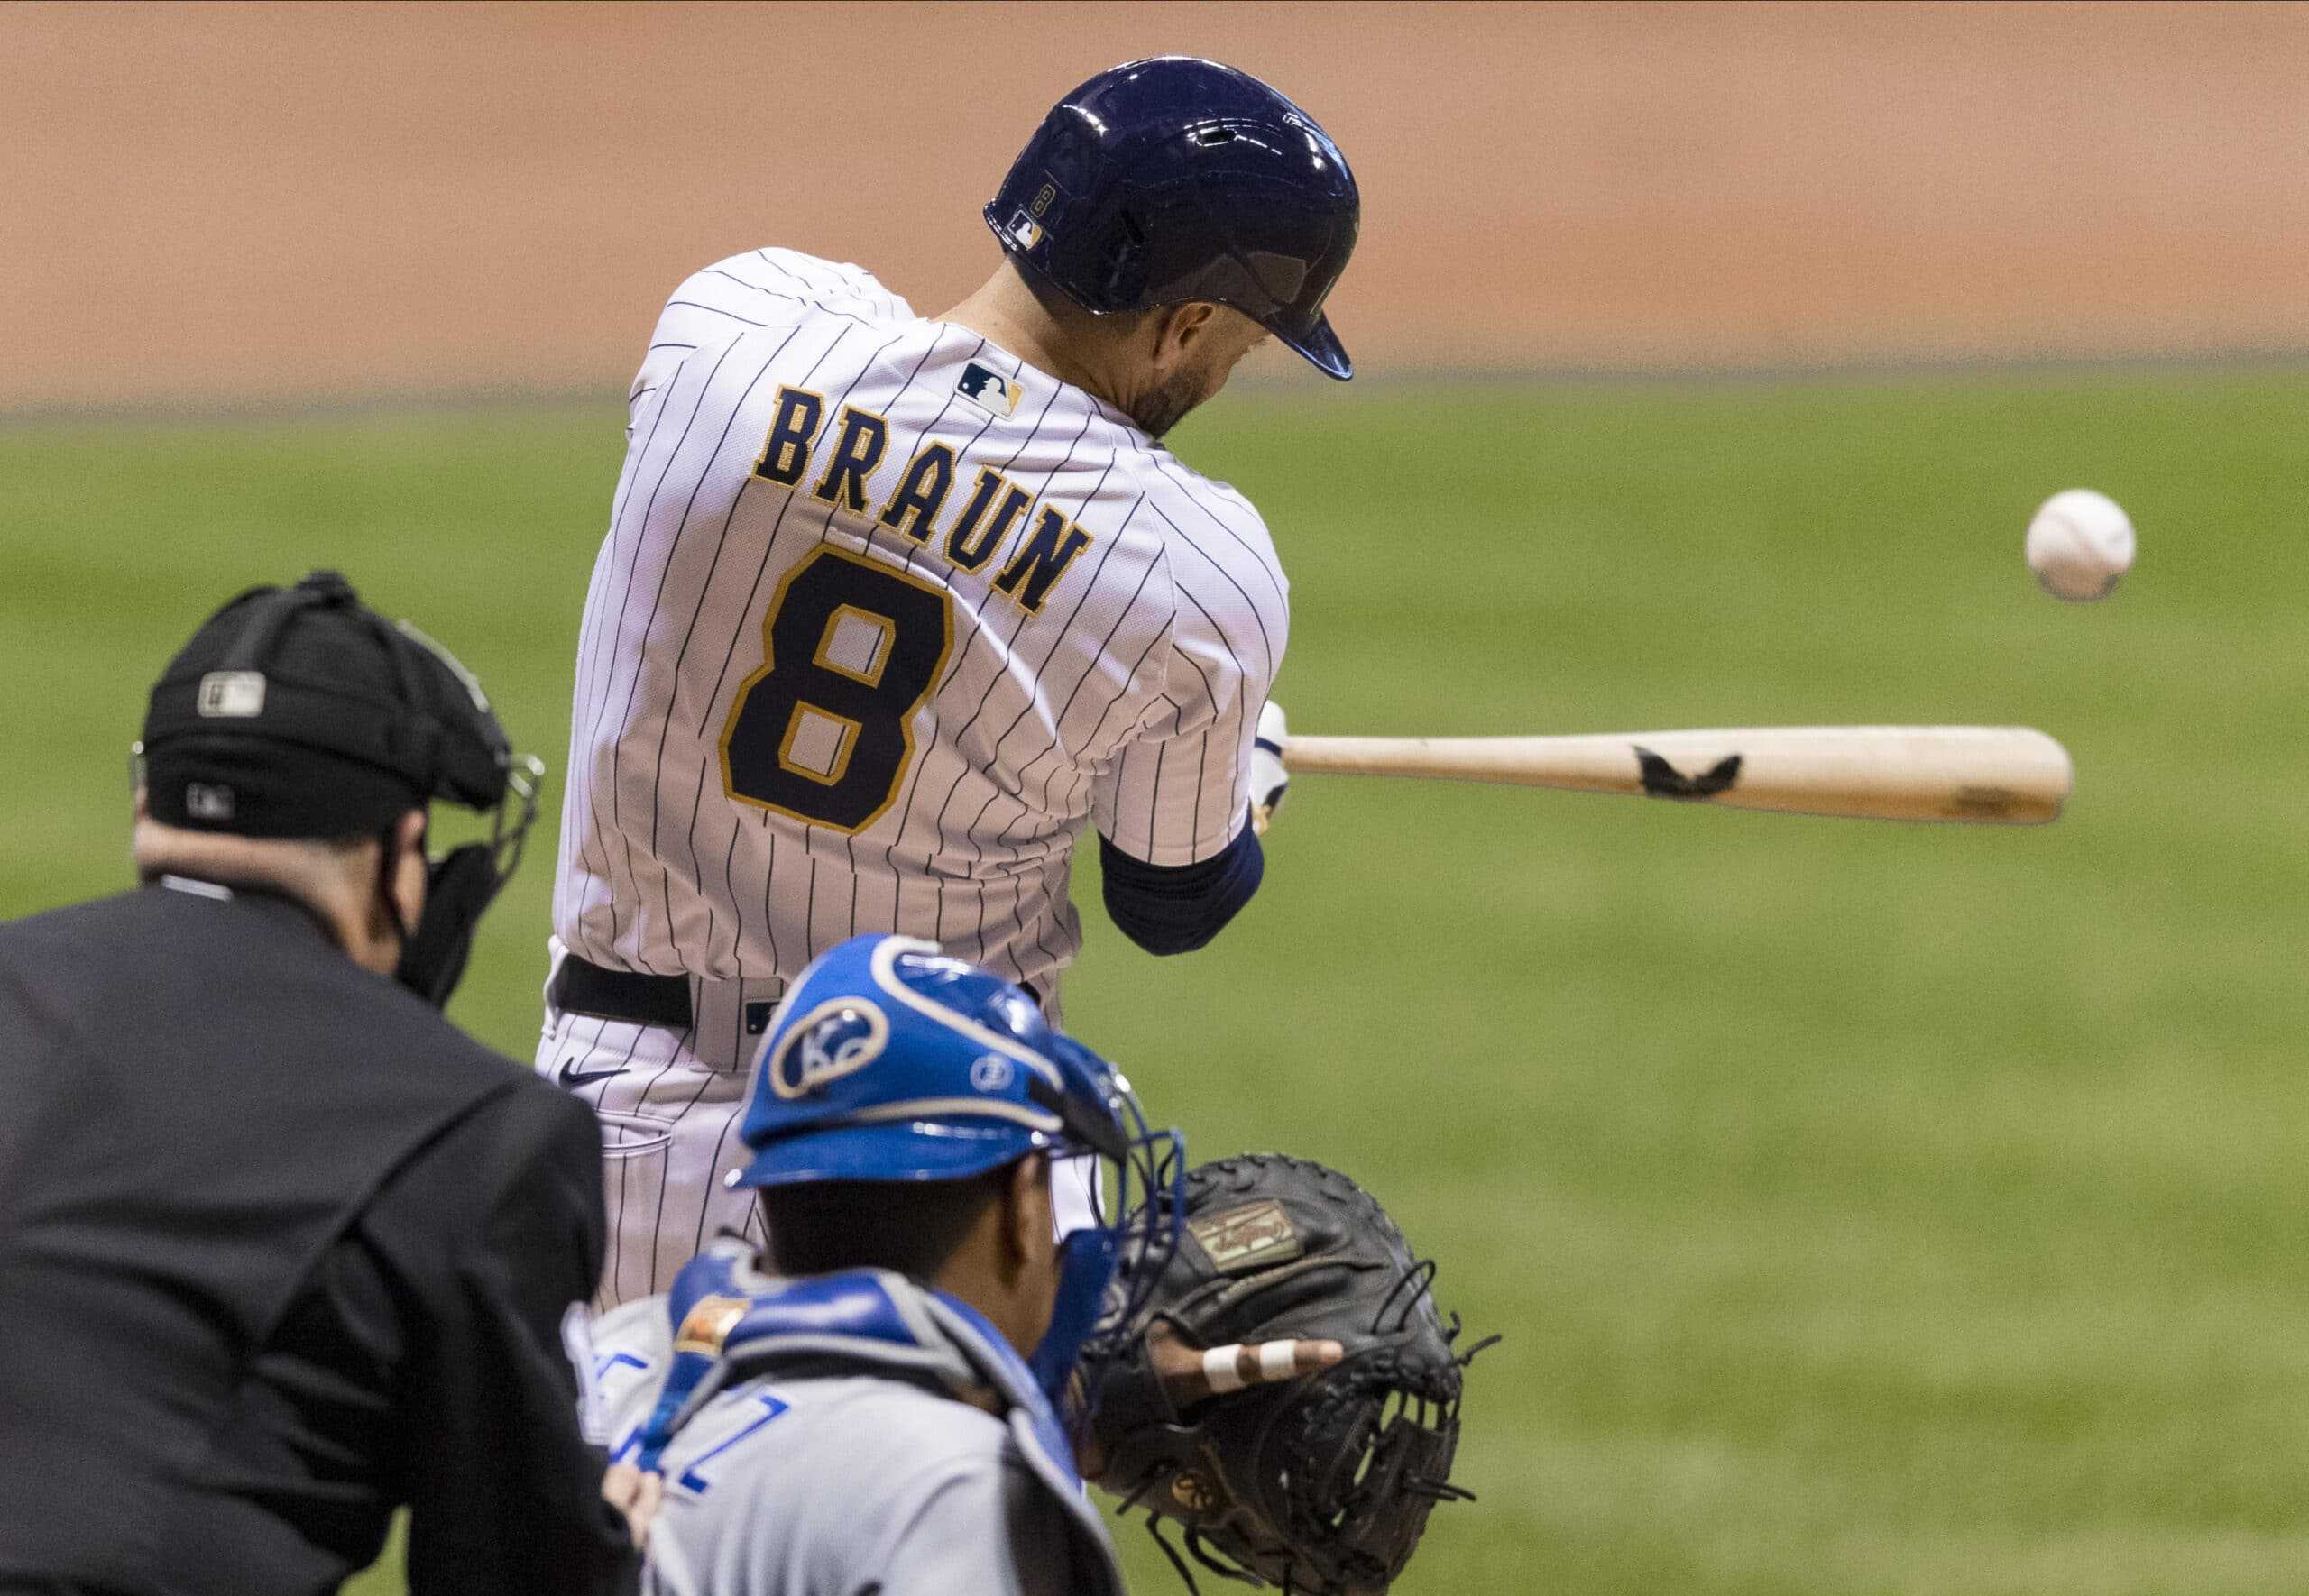 Should the Brewers Retire Ryan Braun's Number?